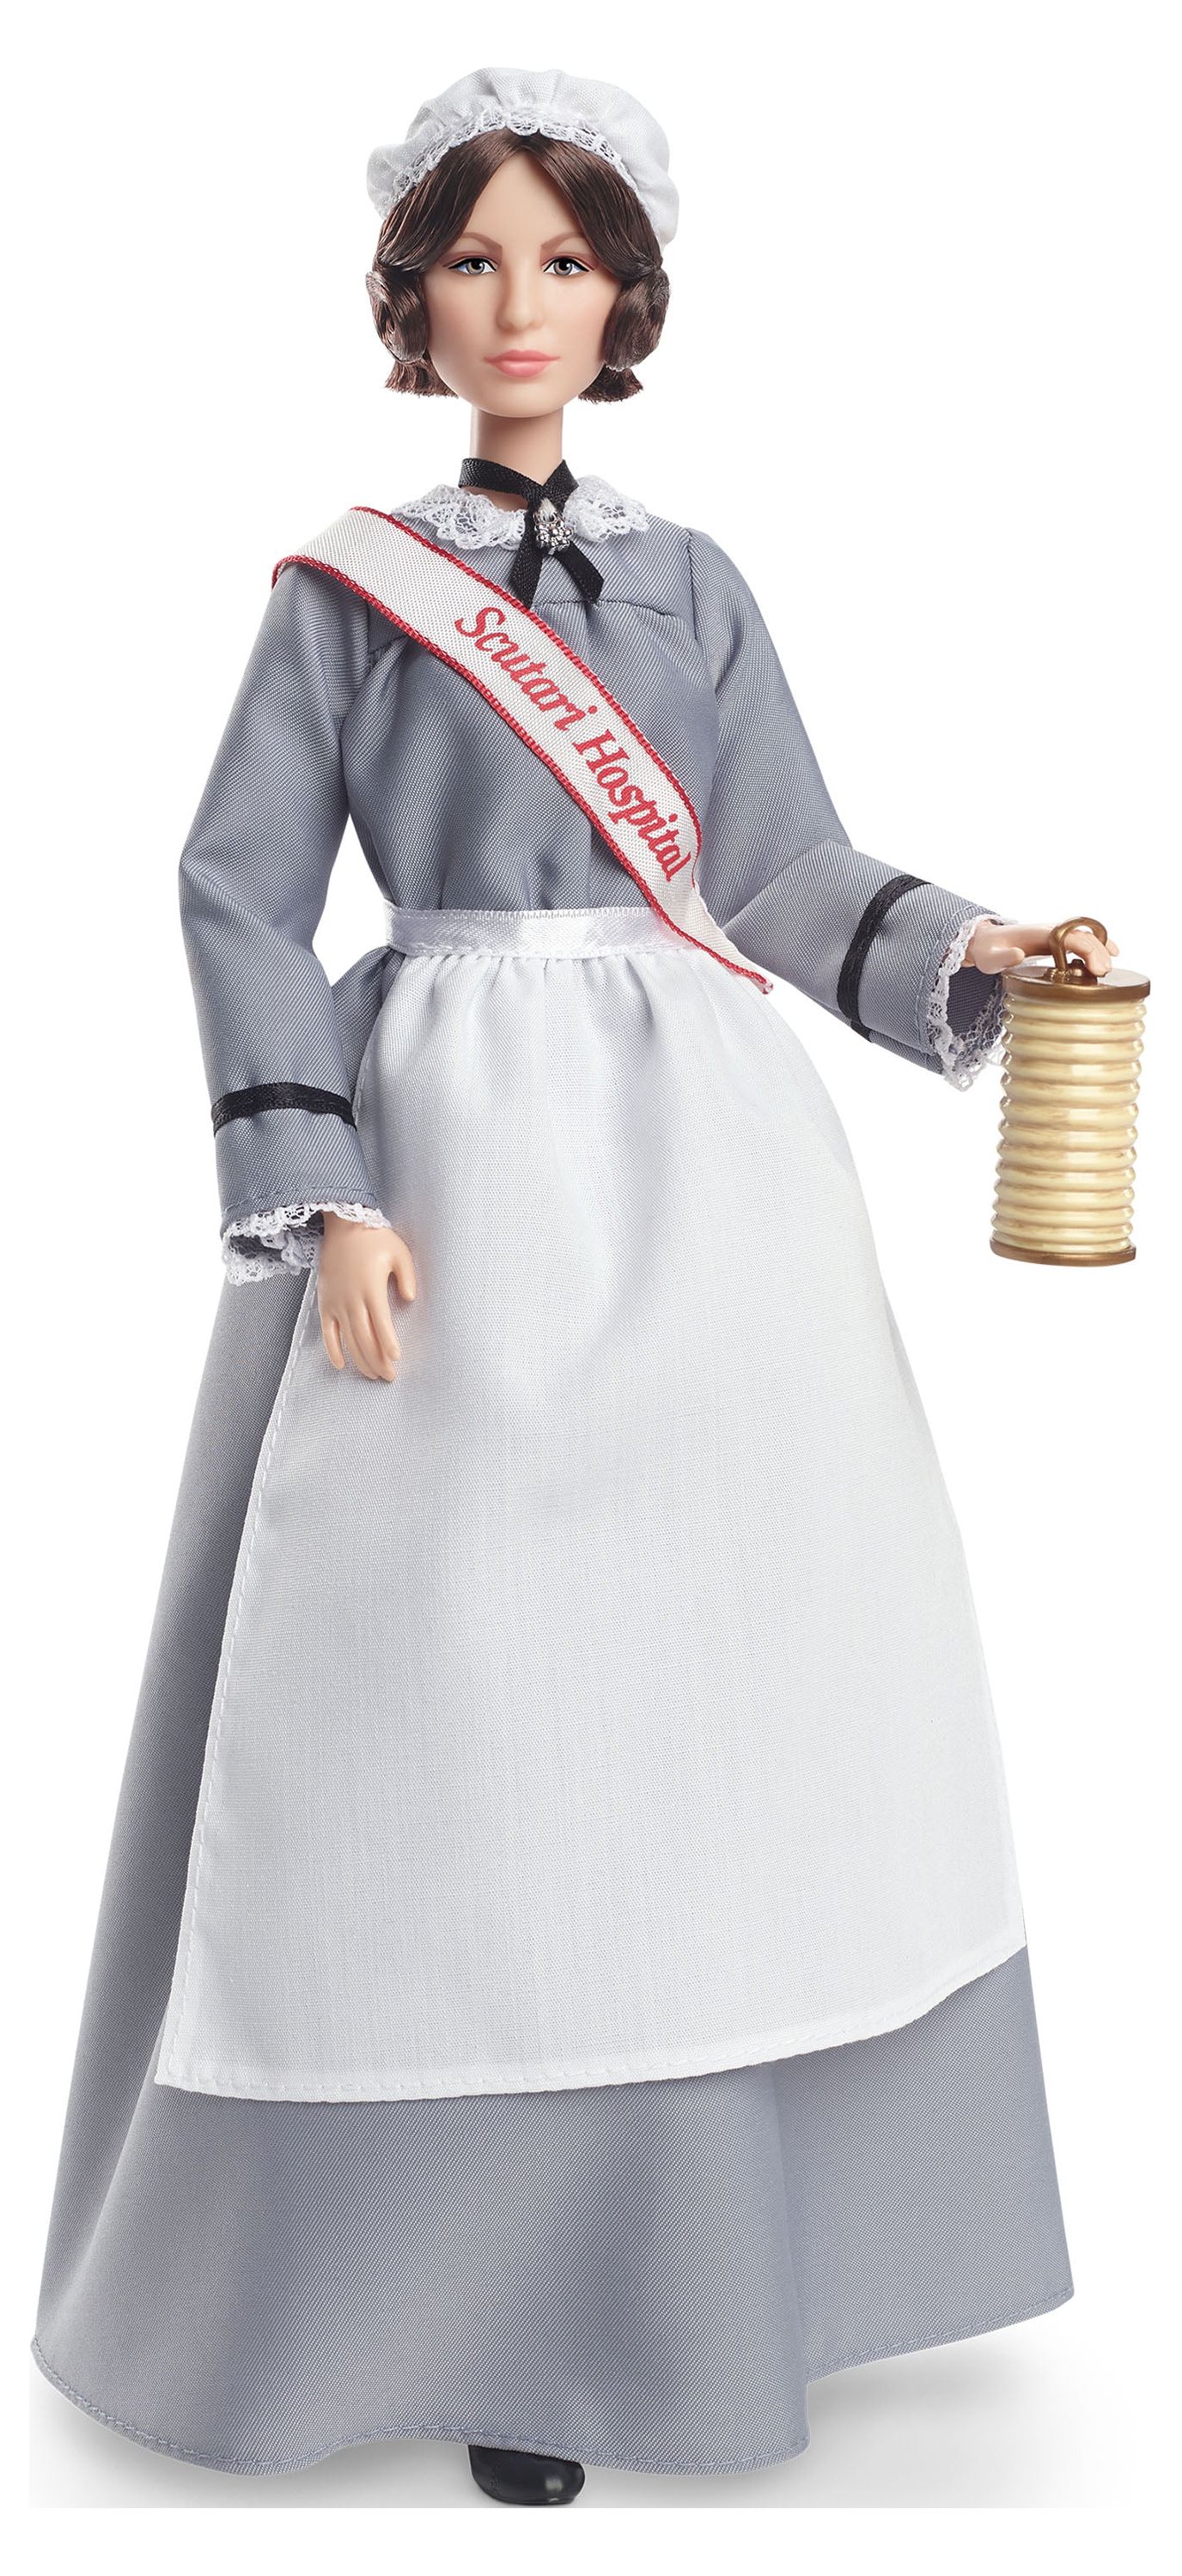 Barbie Inspiring Women Florence Nightingale Collectible Doll, Approx. 12 inch - image 1 of 7